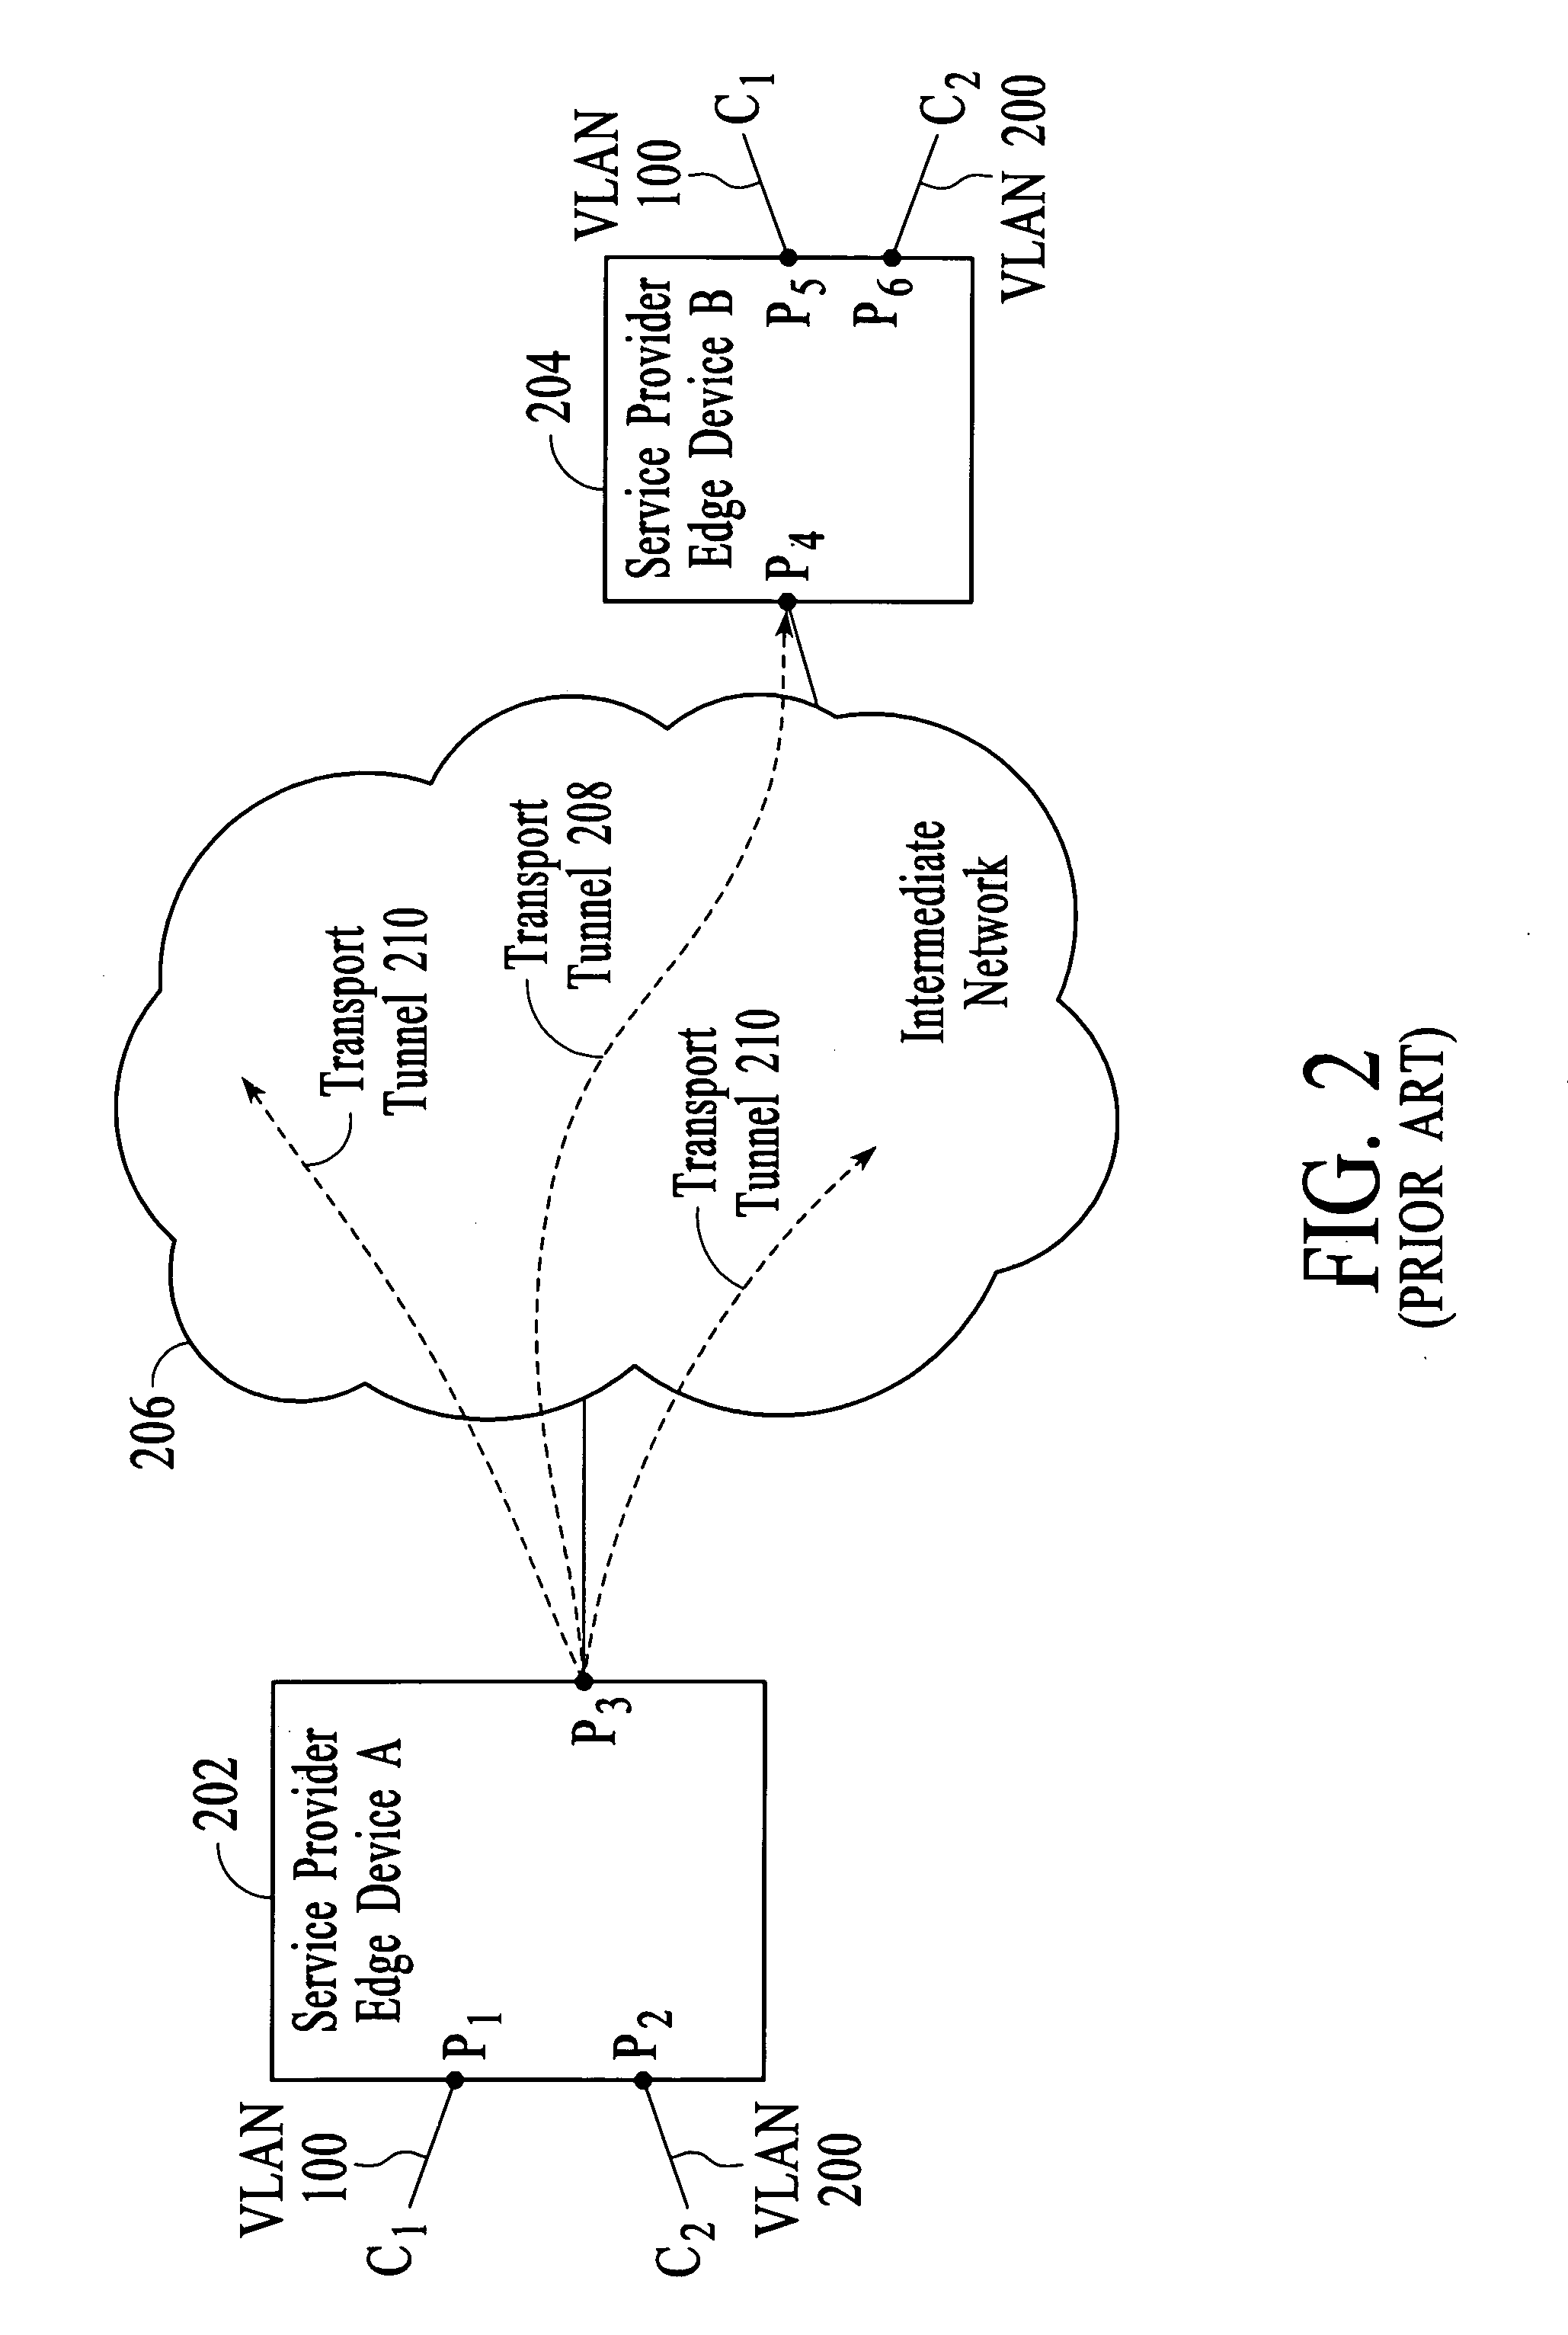 Managing traffic in a multiport network node using logical ports